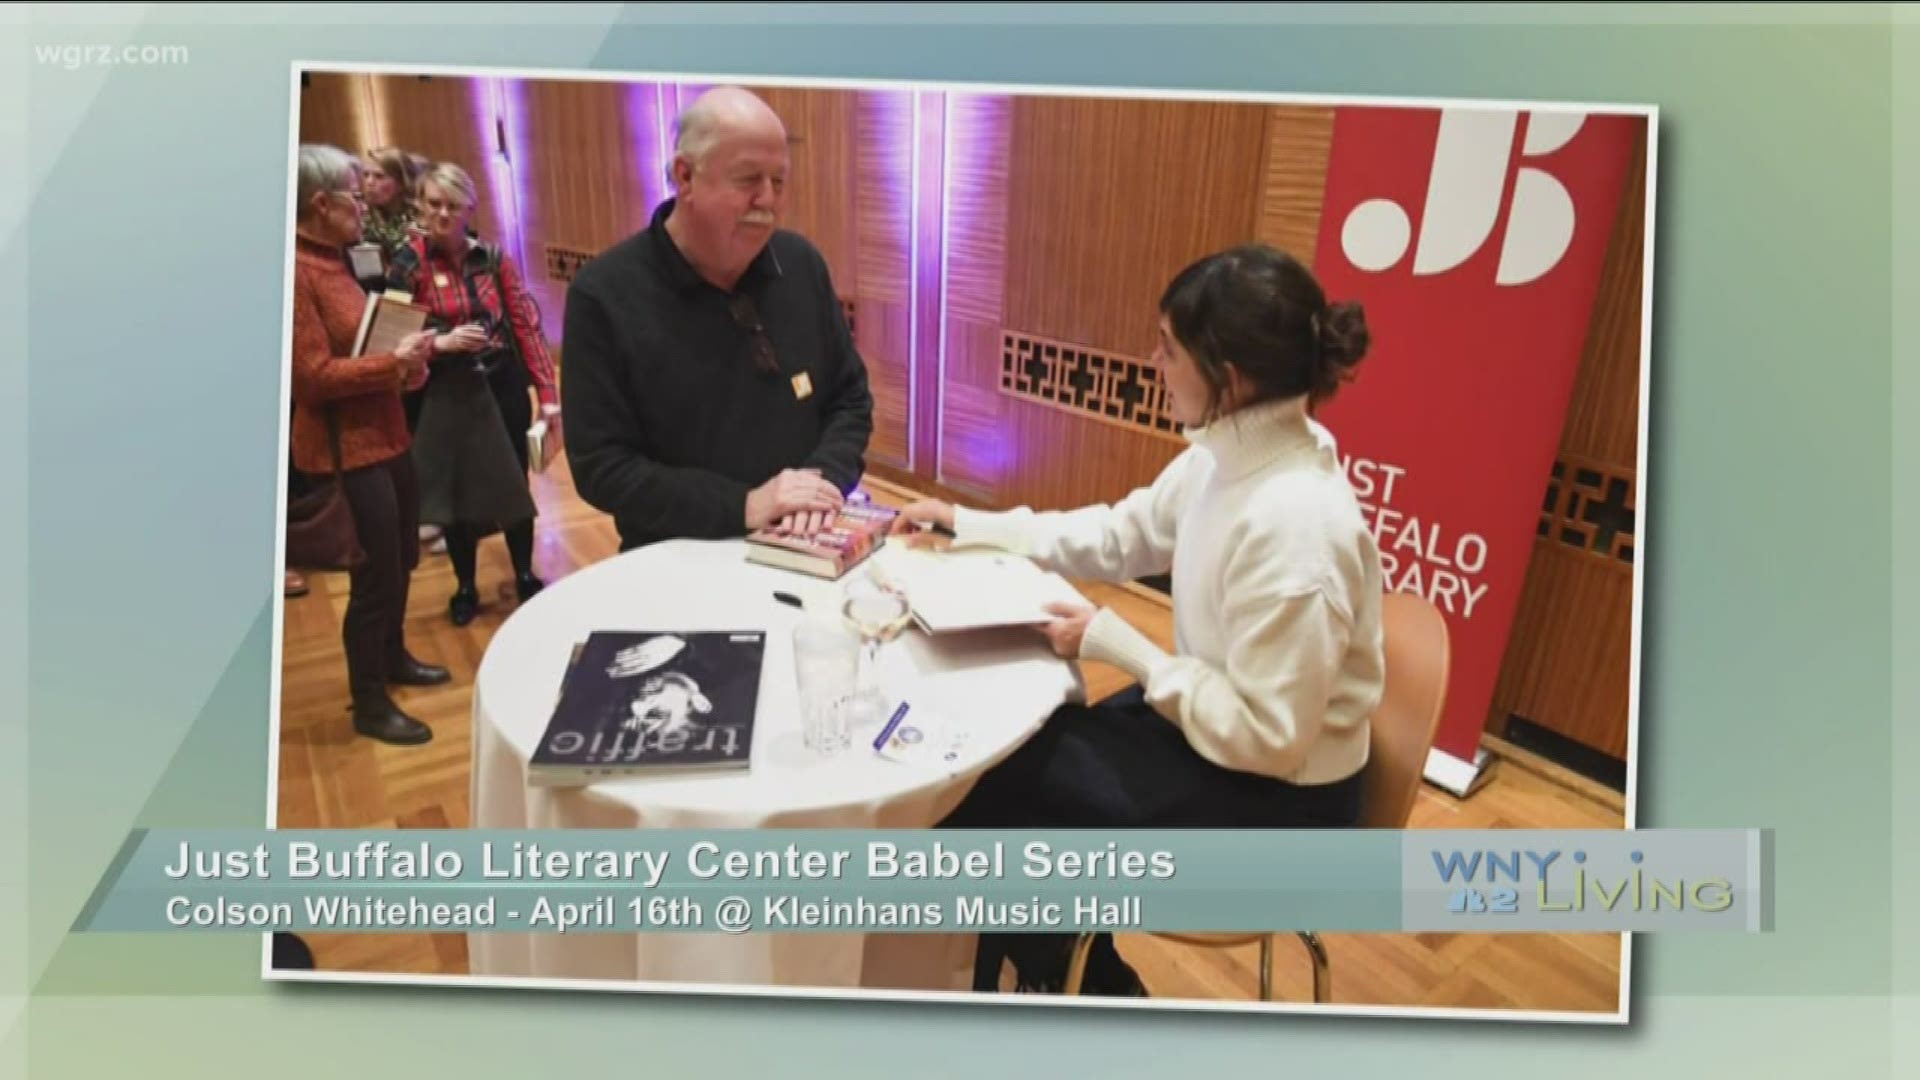 February 1 - Just Buffalo Literacy Center (THIS VIDEO IS SPONSORED BY BUFFALO LITERACY CENTER)